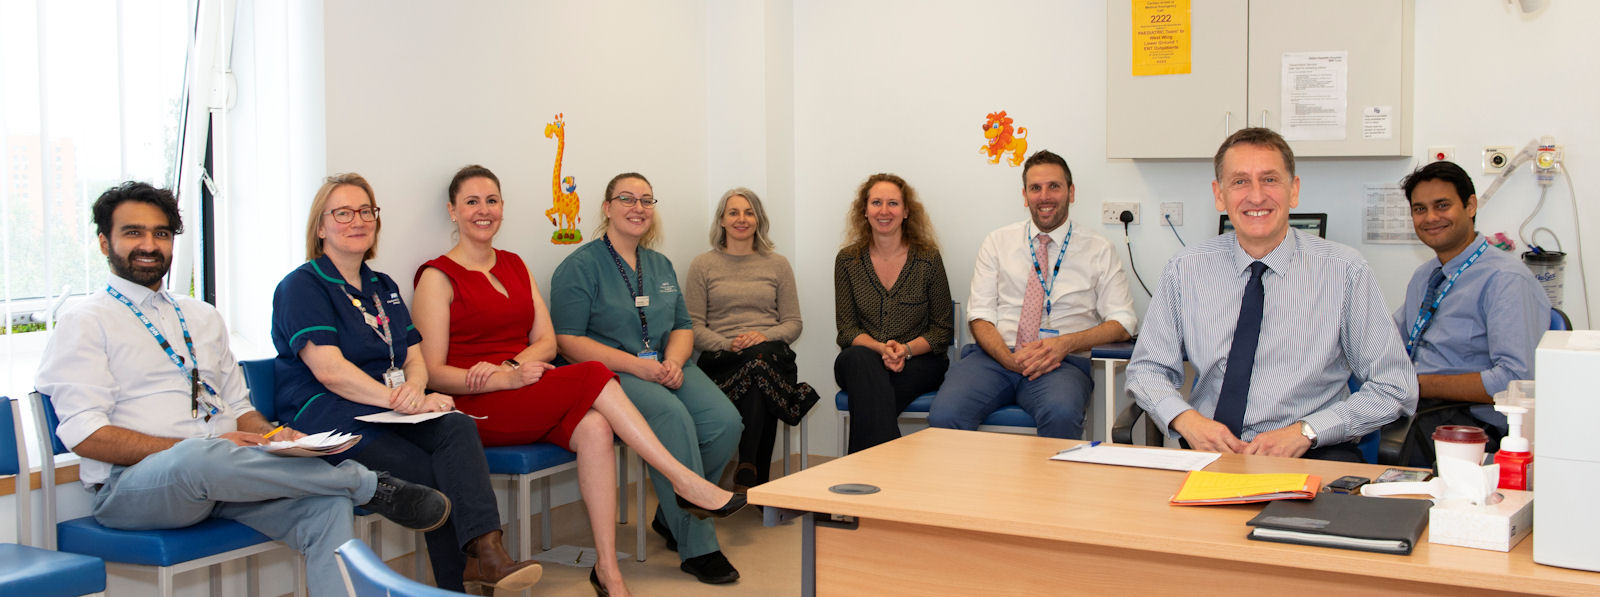 Nine professionals with lanyards seated smiling in a clinic room